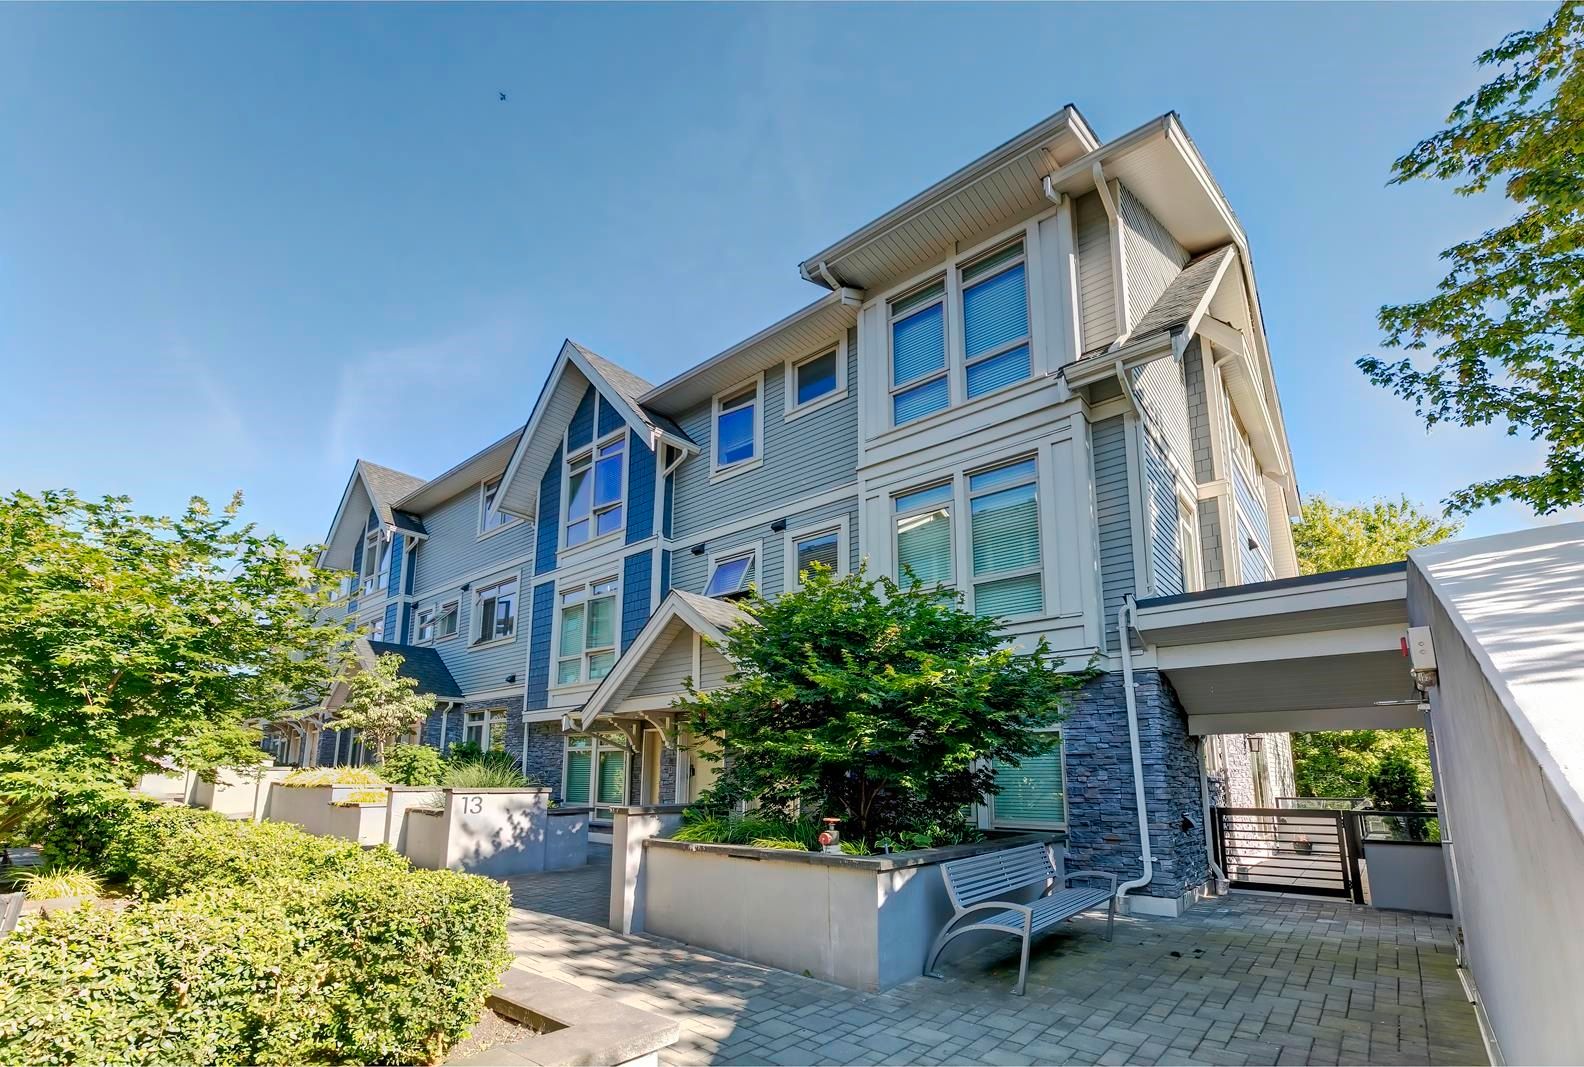 Main Photo: 13 115 W QUEENS Road, North Vancouver, V7N 2K4